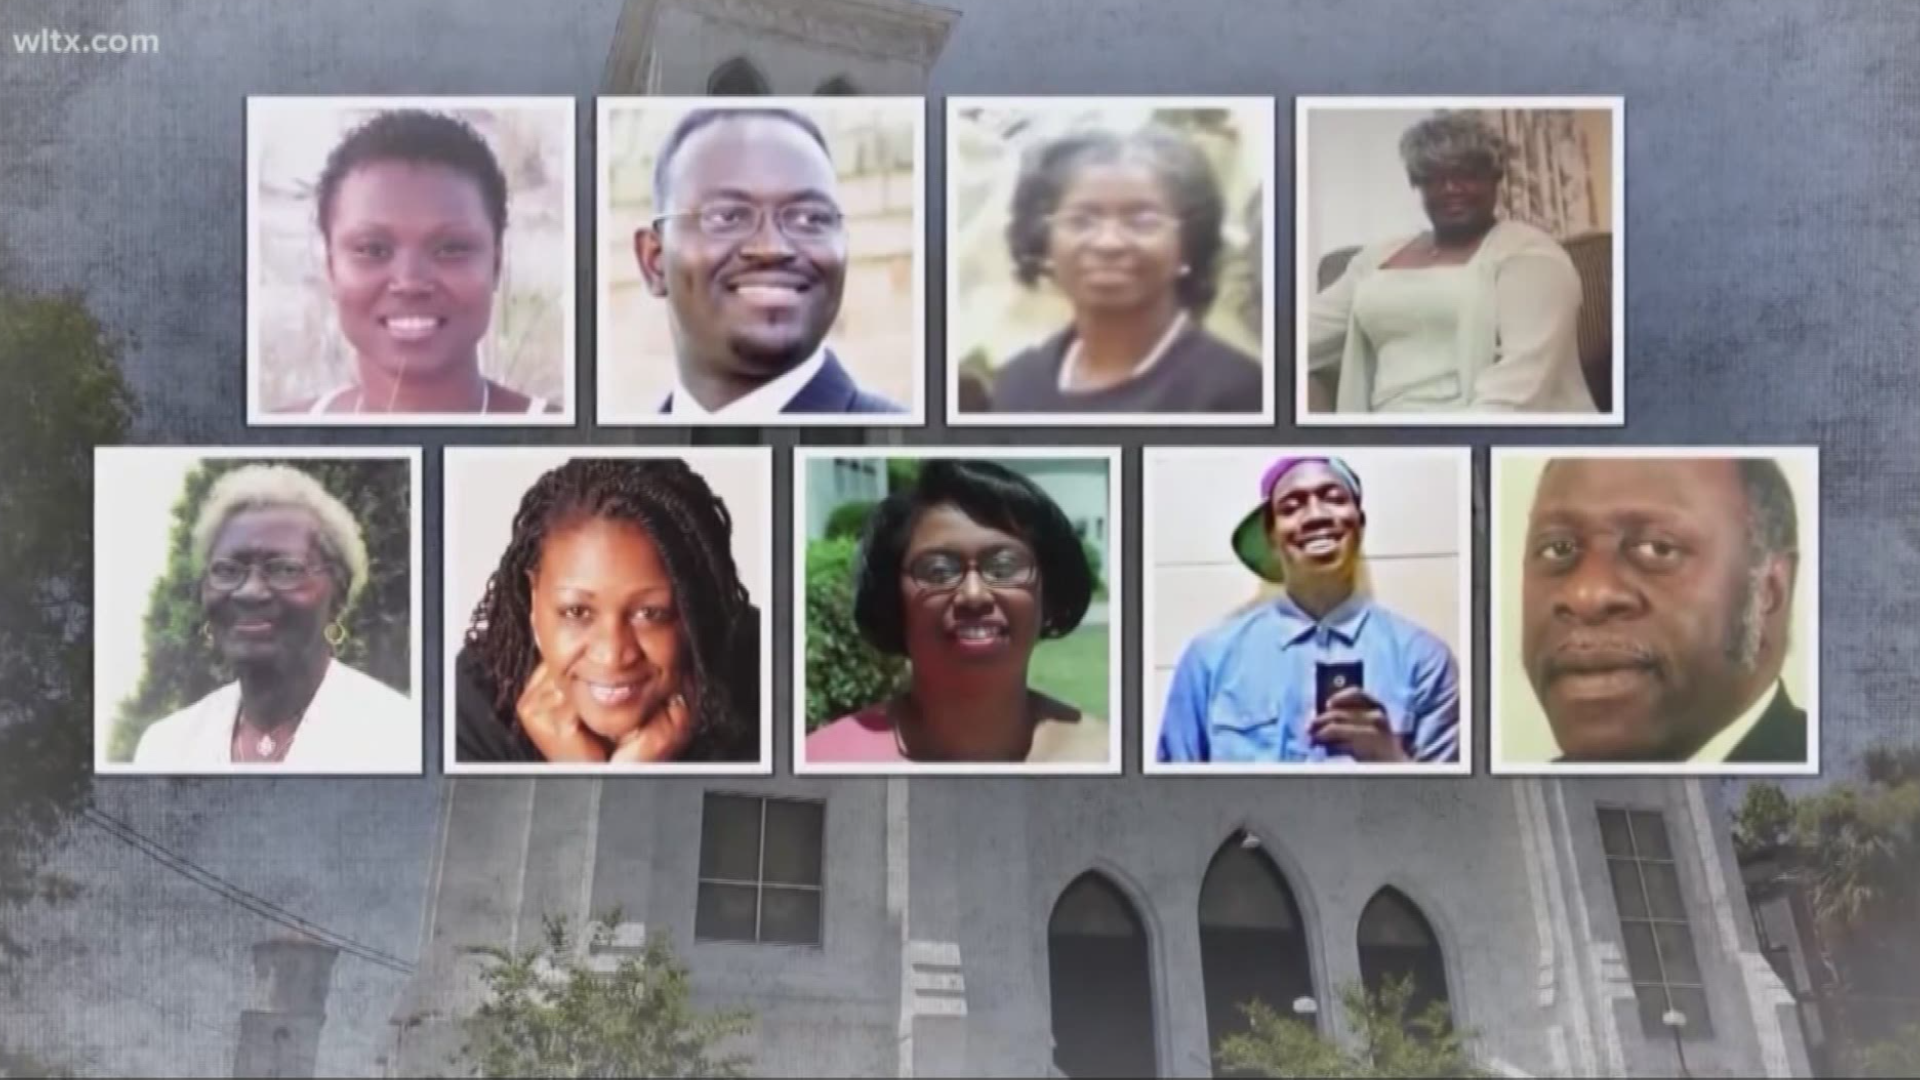 It has been four years since the horrific shooting deaths of nine people inside the Mother Emanuel AME church in Charleston.